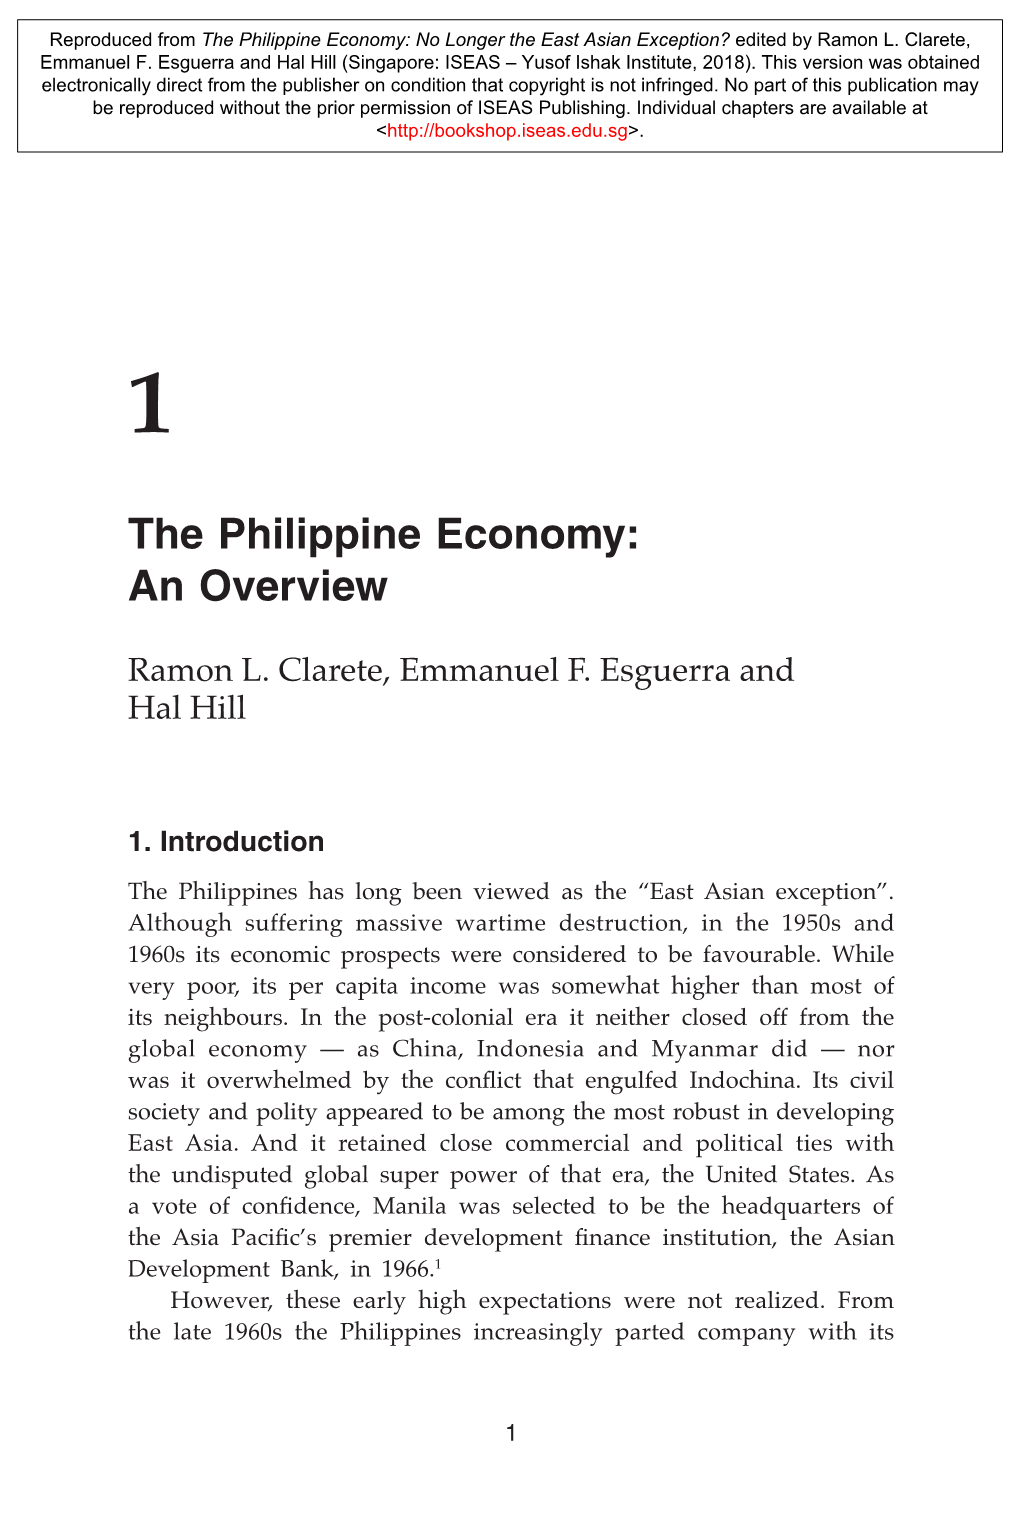 The Philippine Economy: No Longer the East Asian Exception?